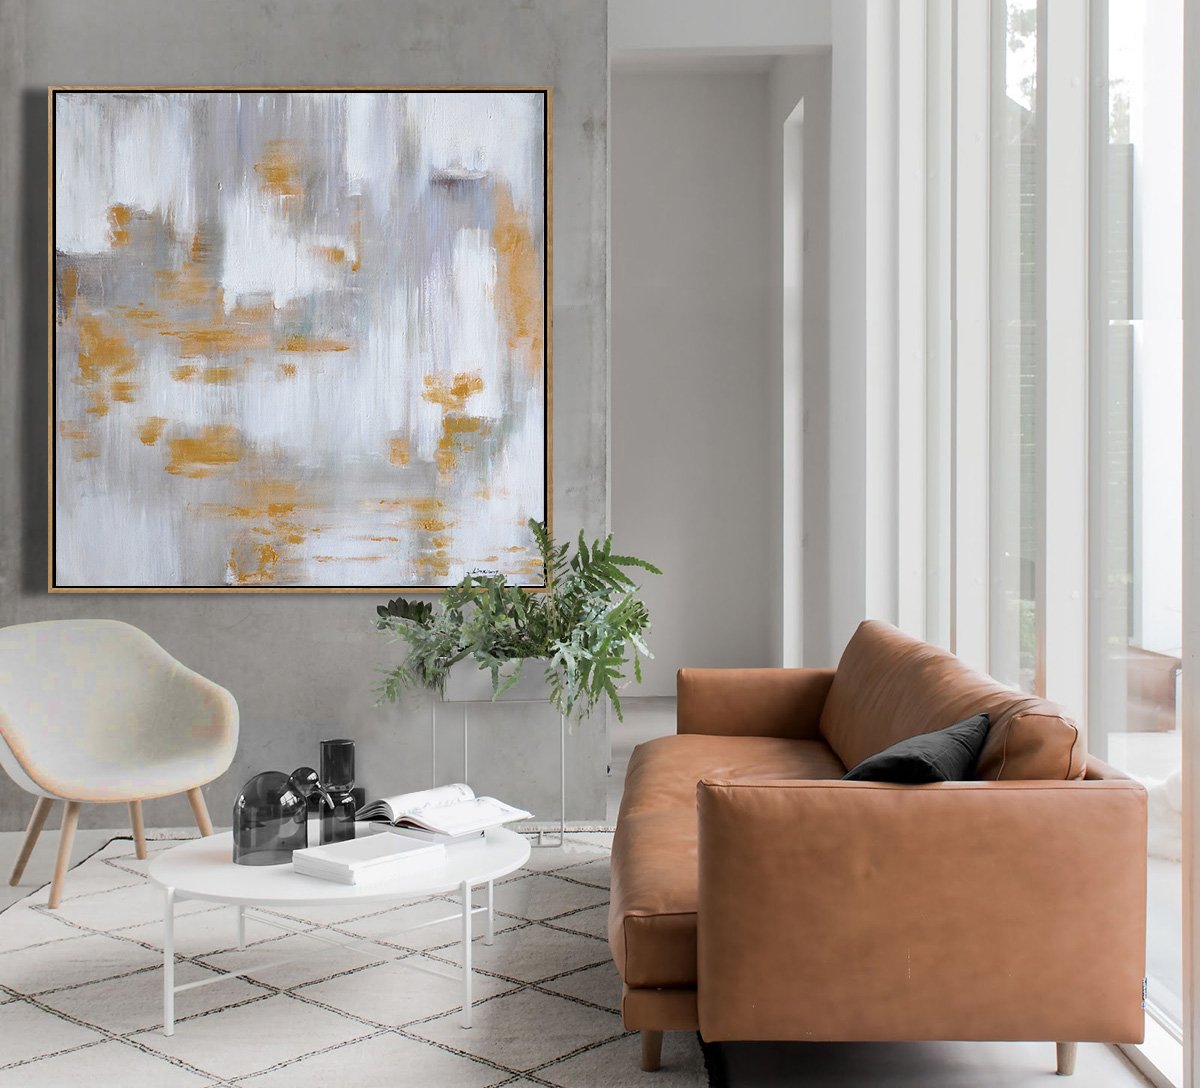 Extra Large 72" Acrylic Painting,Large Abstract Landscape Oil Painting On Canvas,Large Contemporary Painting,White,Grey,Yellow.etc